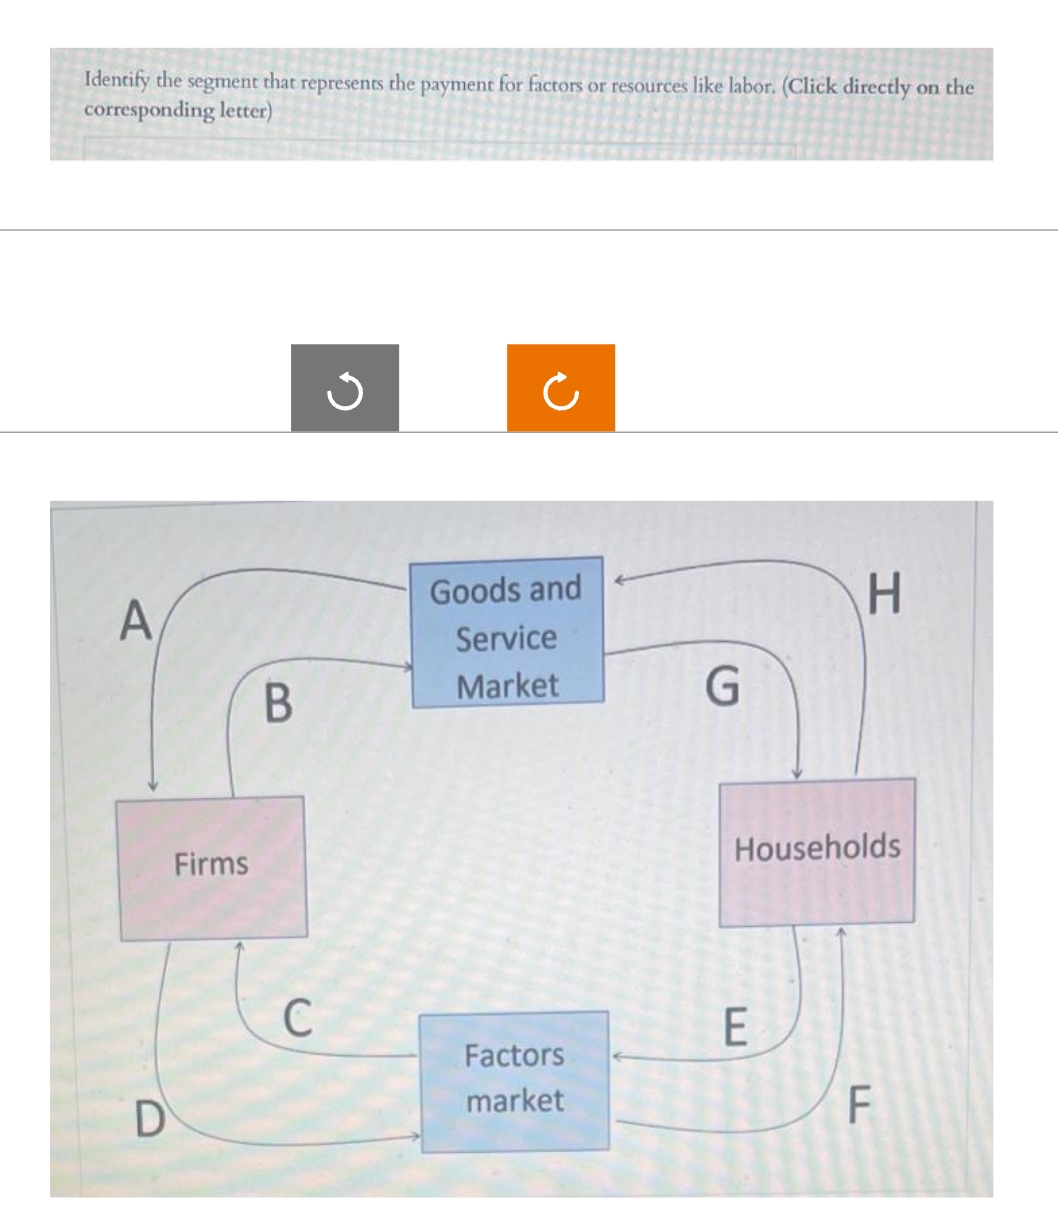 Identify the segment that represents the payment for factors or resources like labor. (Click directly on the
corresponding letter)
Goods and
A
H
Service
Market
Households
E
Factors
market
F
D
Firms
B
C
G